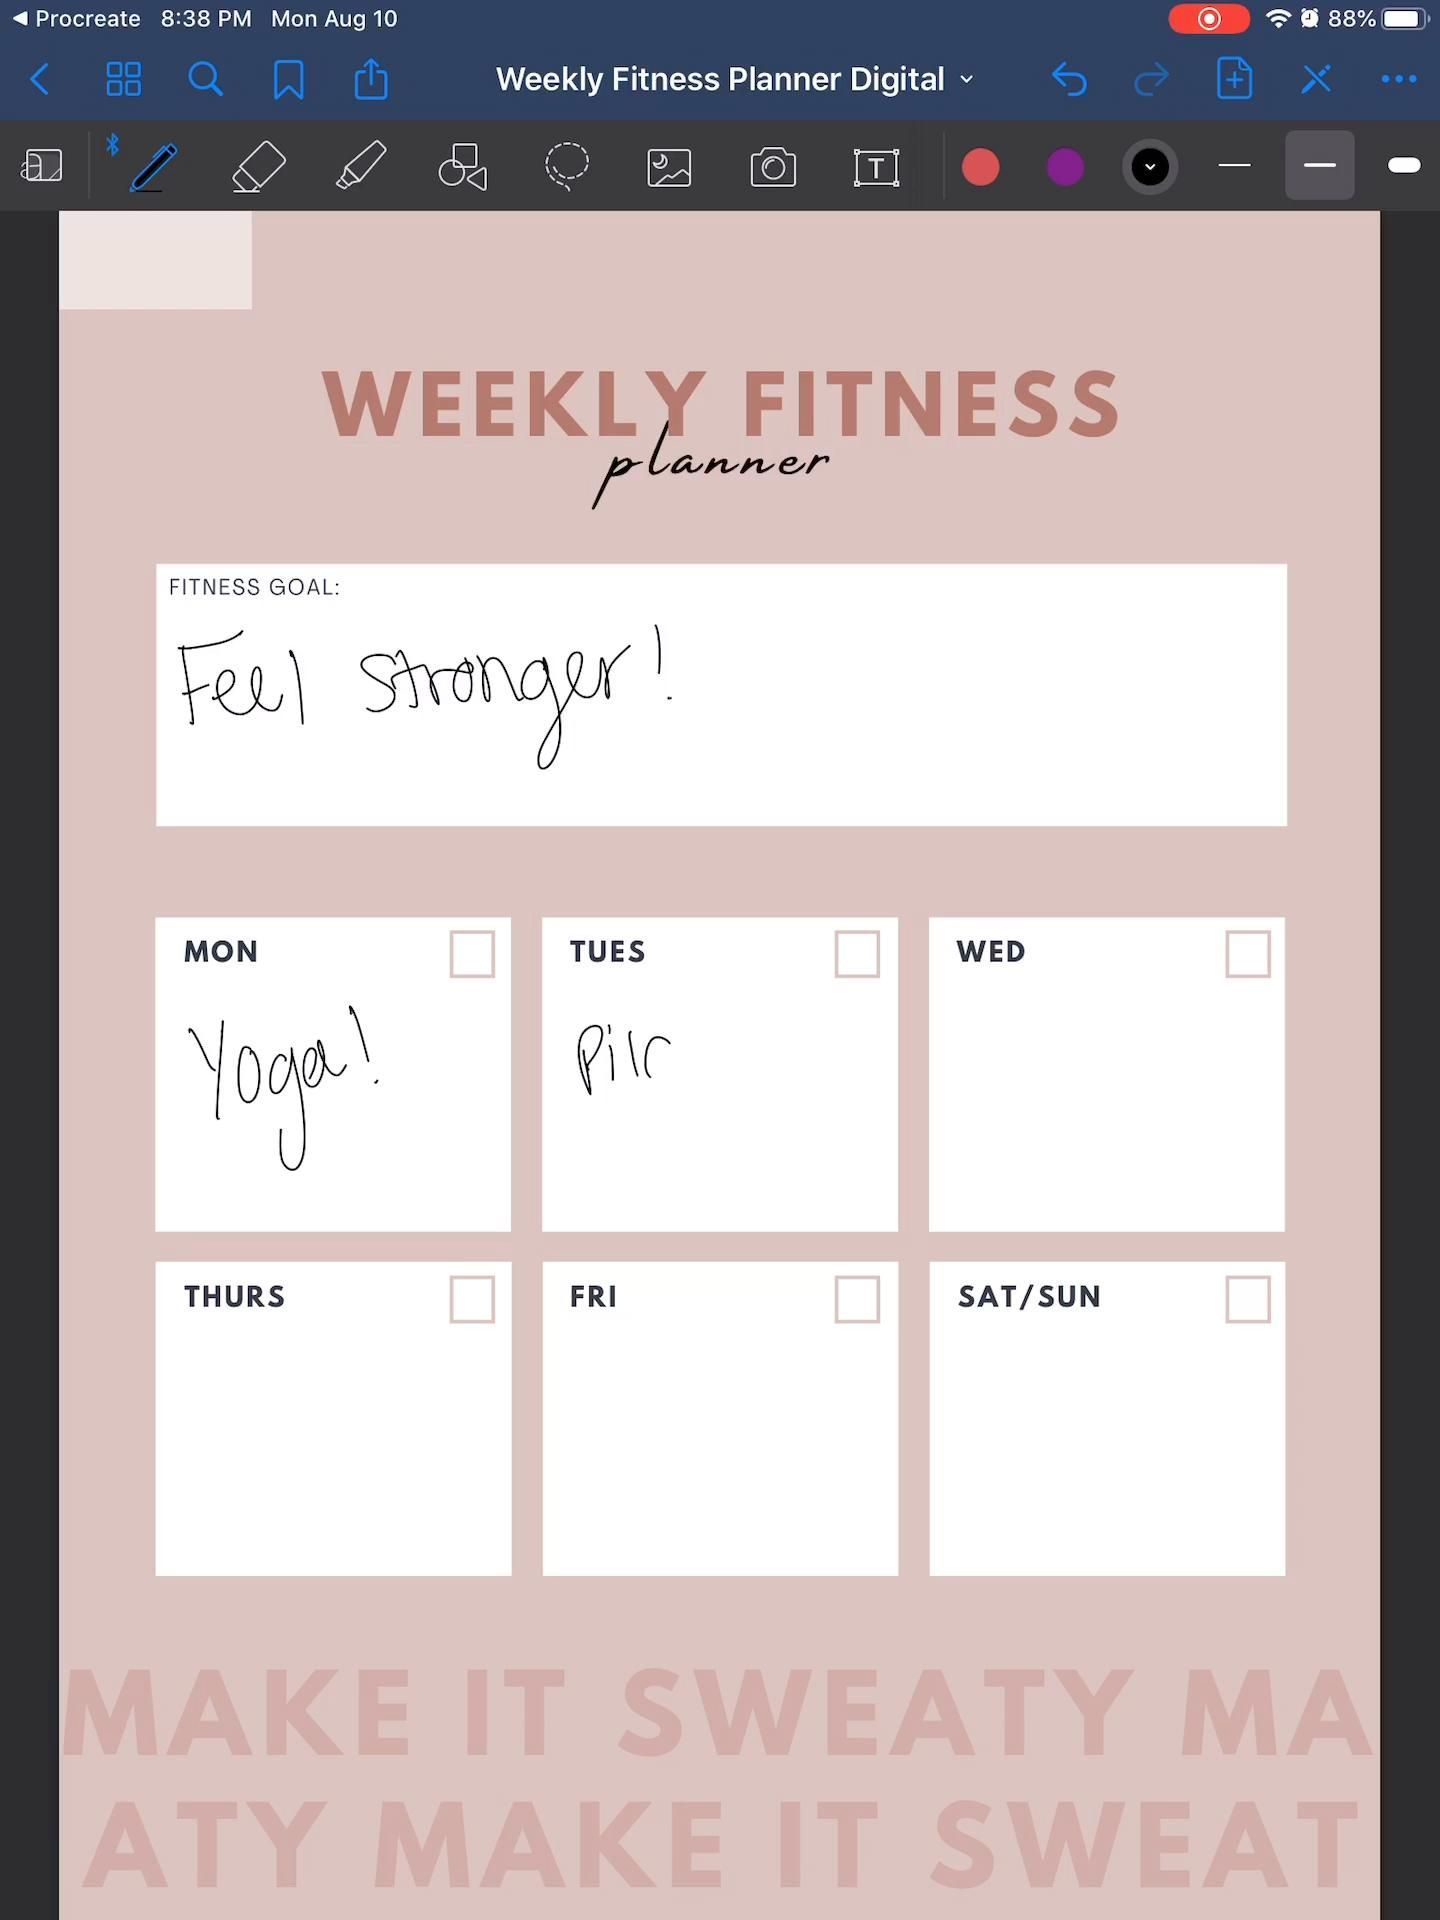 Weekly Fitness Planner  - Great for Goodnotes and iPad Planning - Weekly Fitness Planner  - Great for Goodnotes and iPad Planning -   18 fitness Instagram challenge ideas